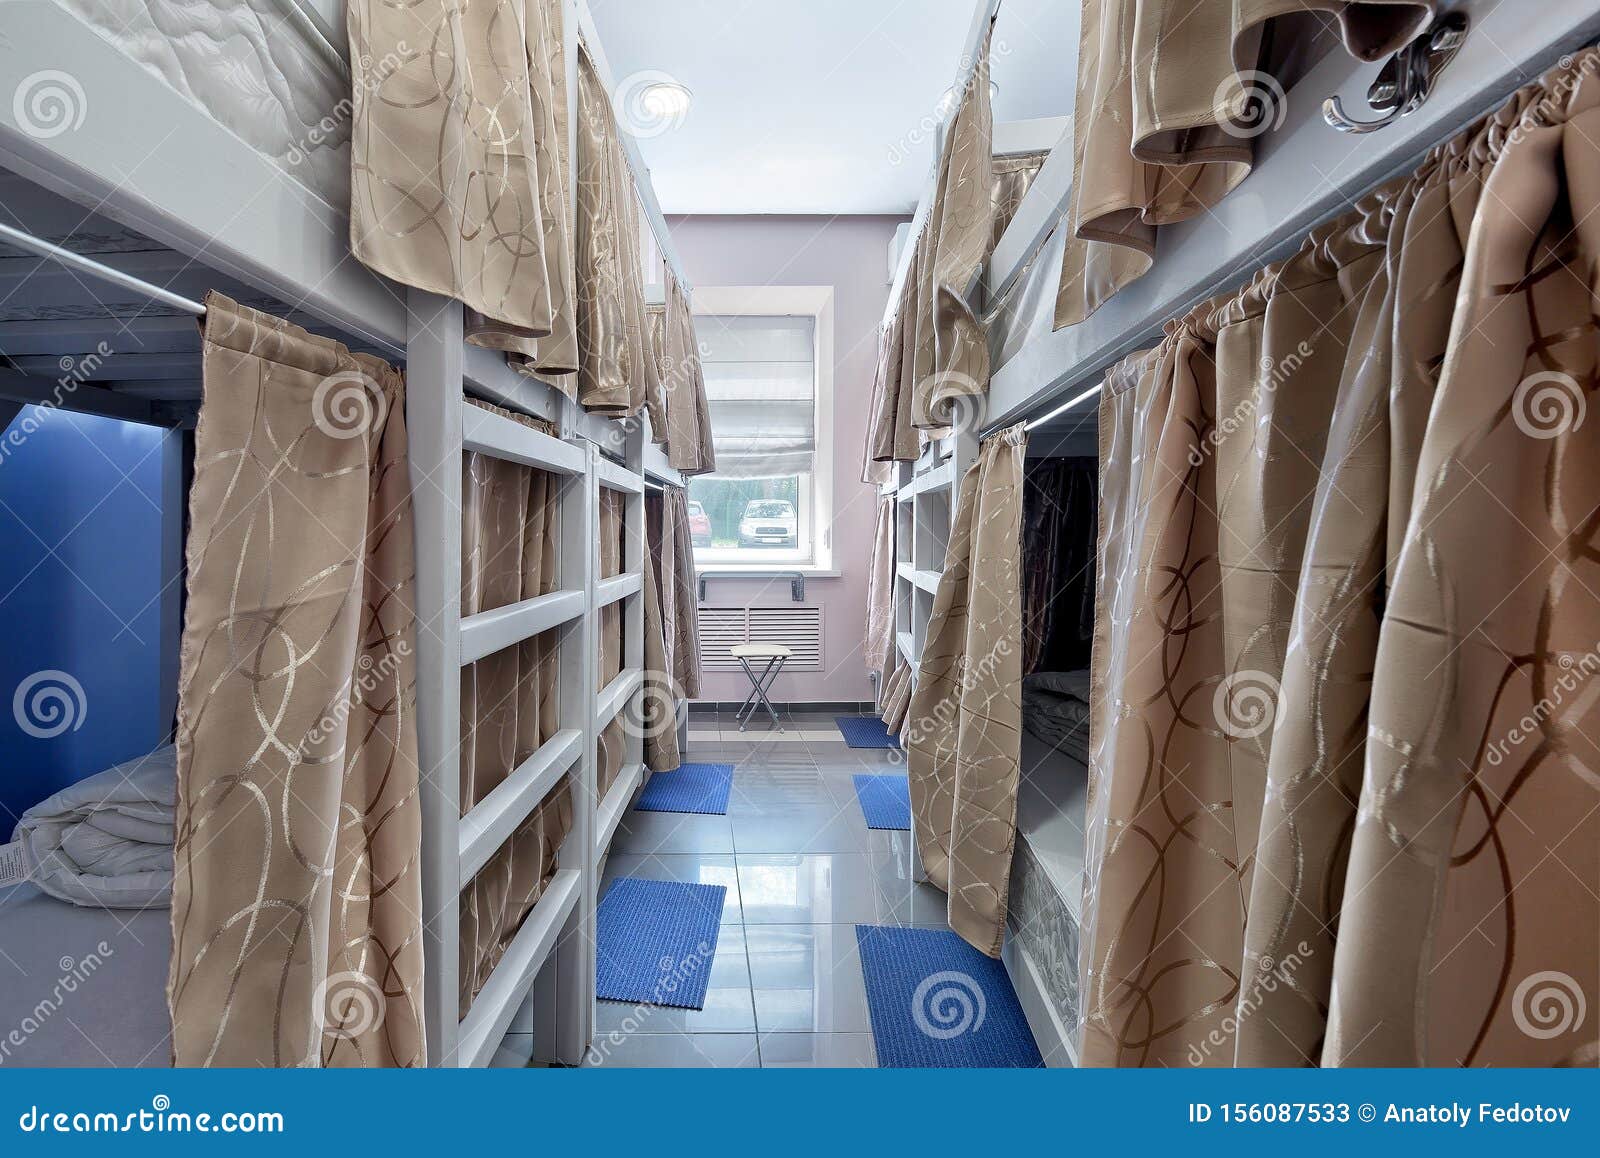 Interior Of The Hostel Room Bunk Beds With Fabric Blinds